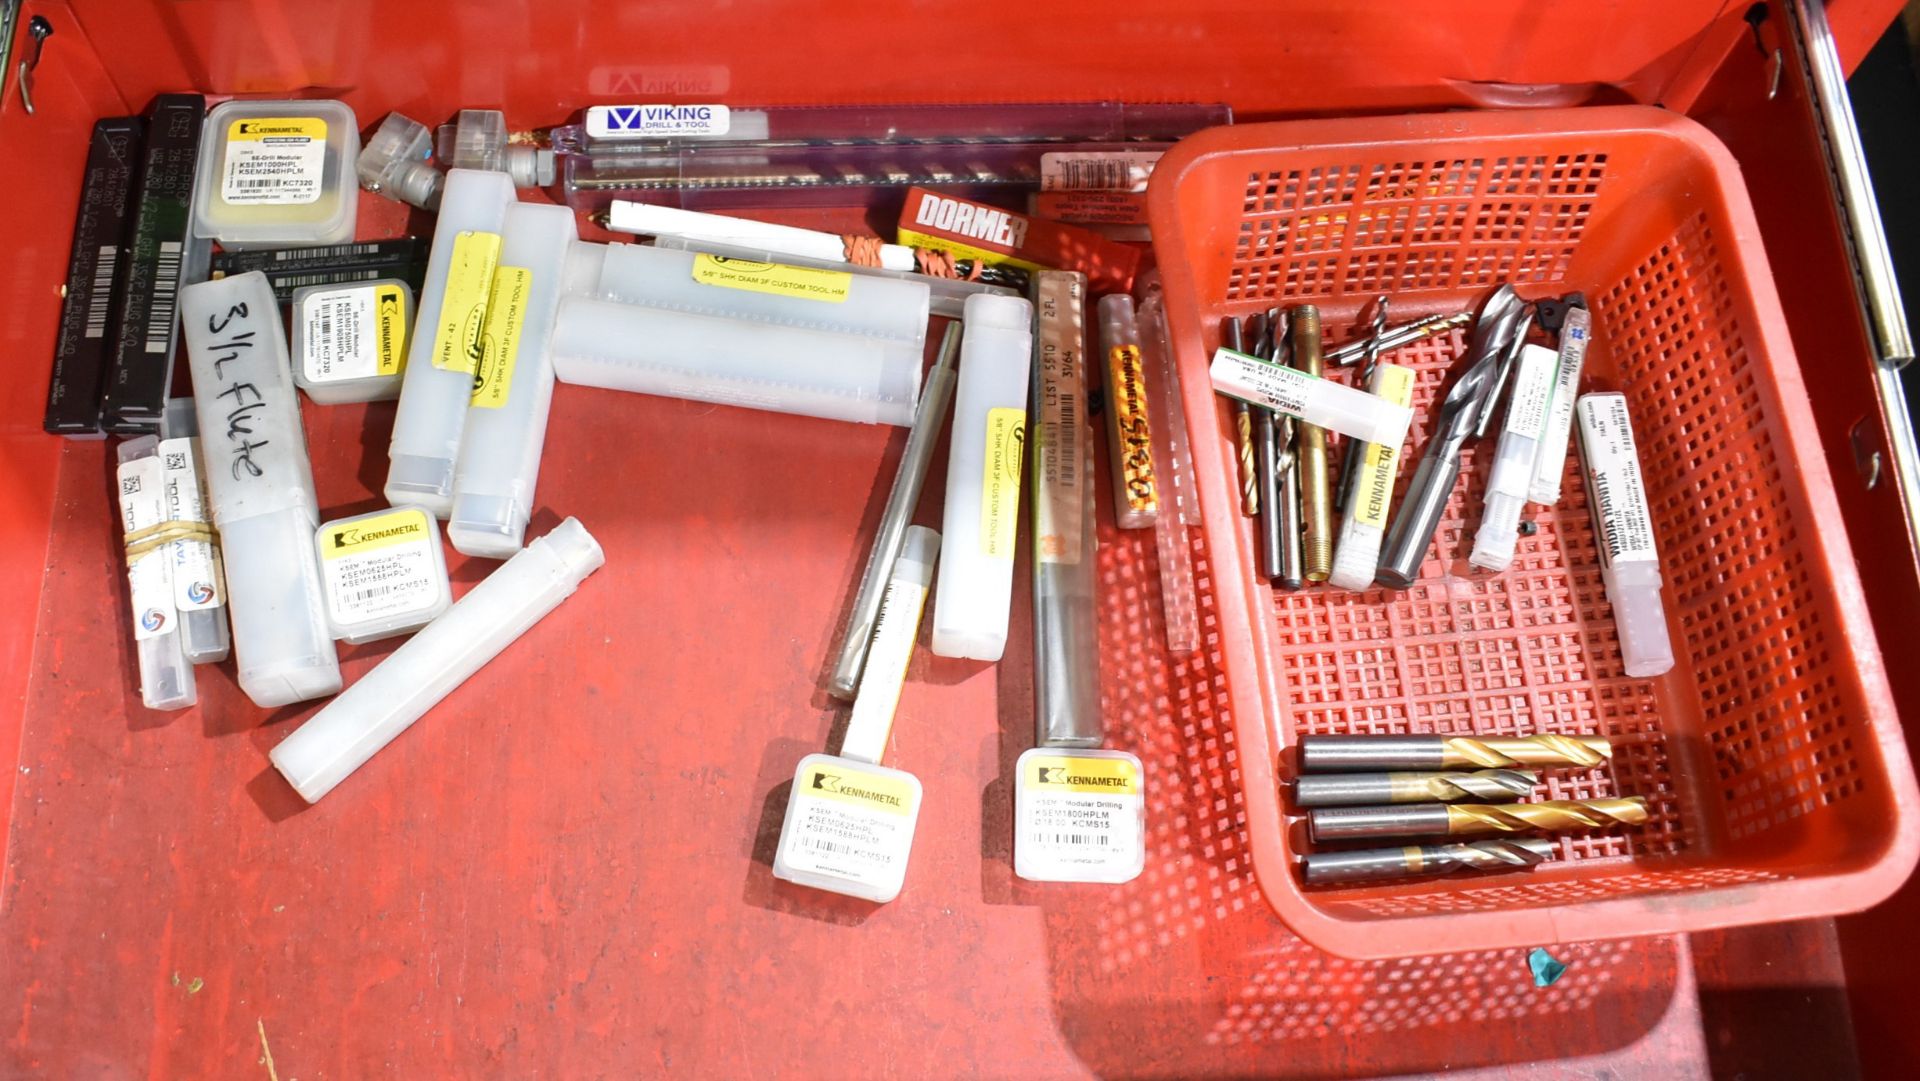 LOT/ CONTENTS OF ROLLING TOOL CABINET CONSISTING OF COLLETS, HEAT SHRINK TOOLING, PARALLELS, CARBIDE - Image 6 of 8